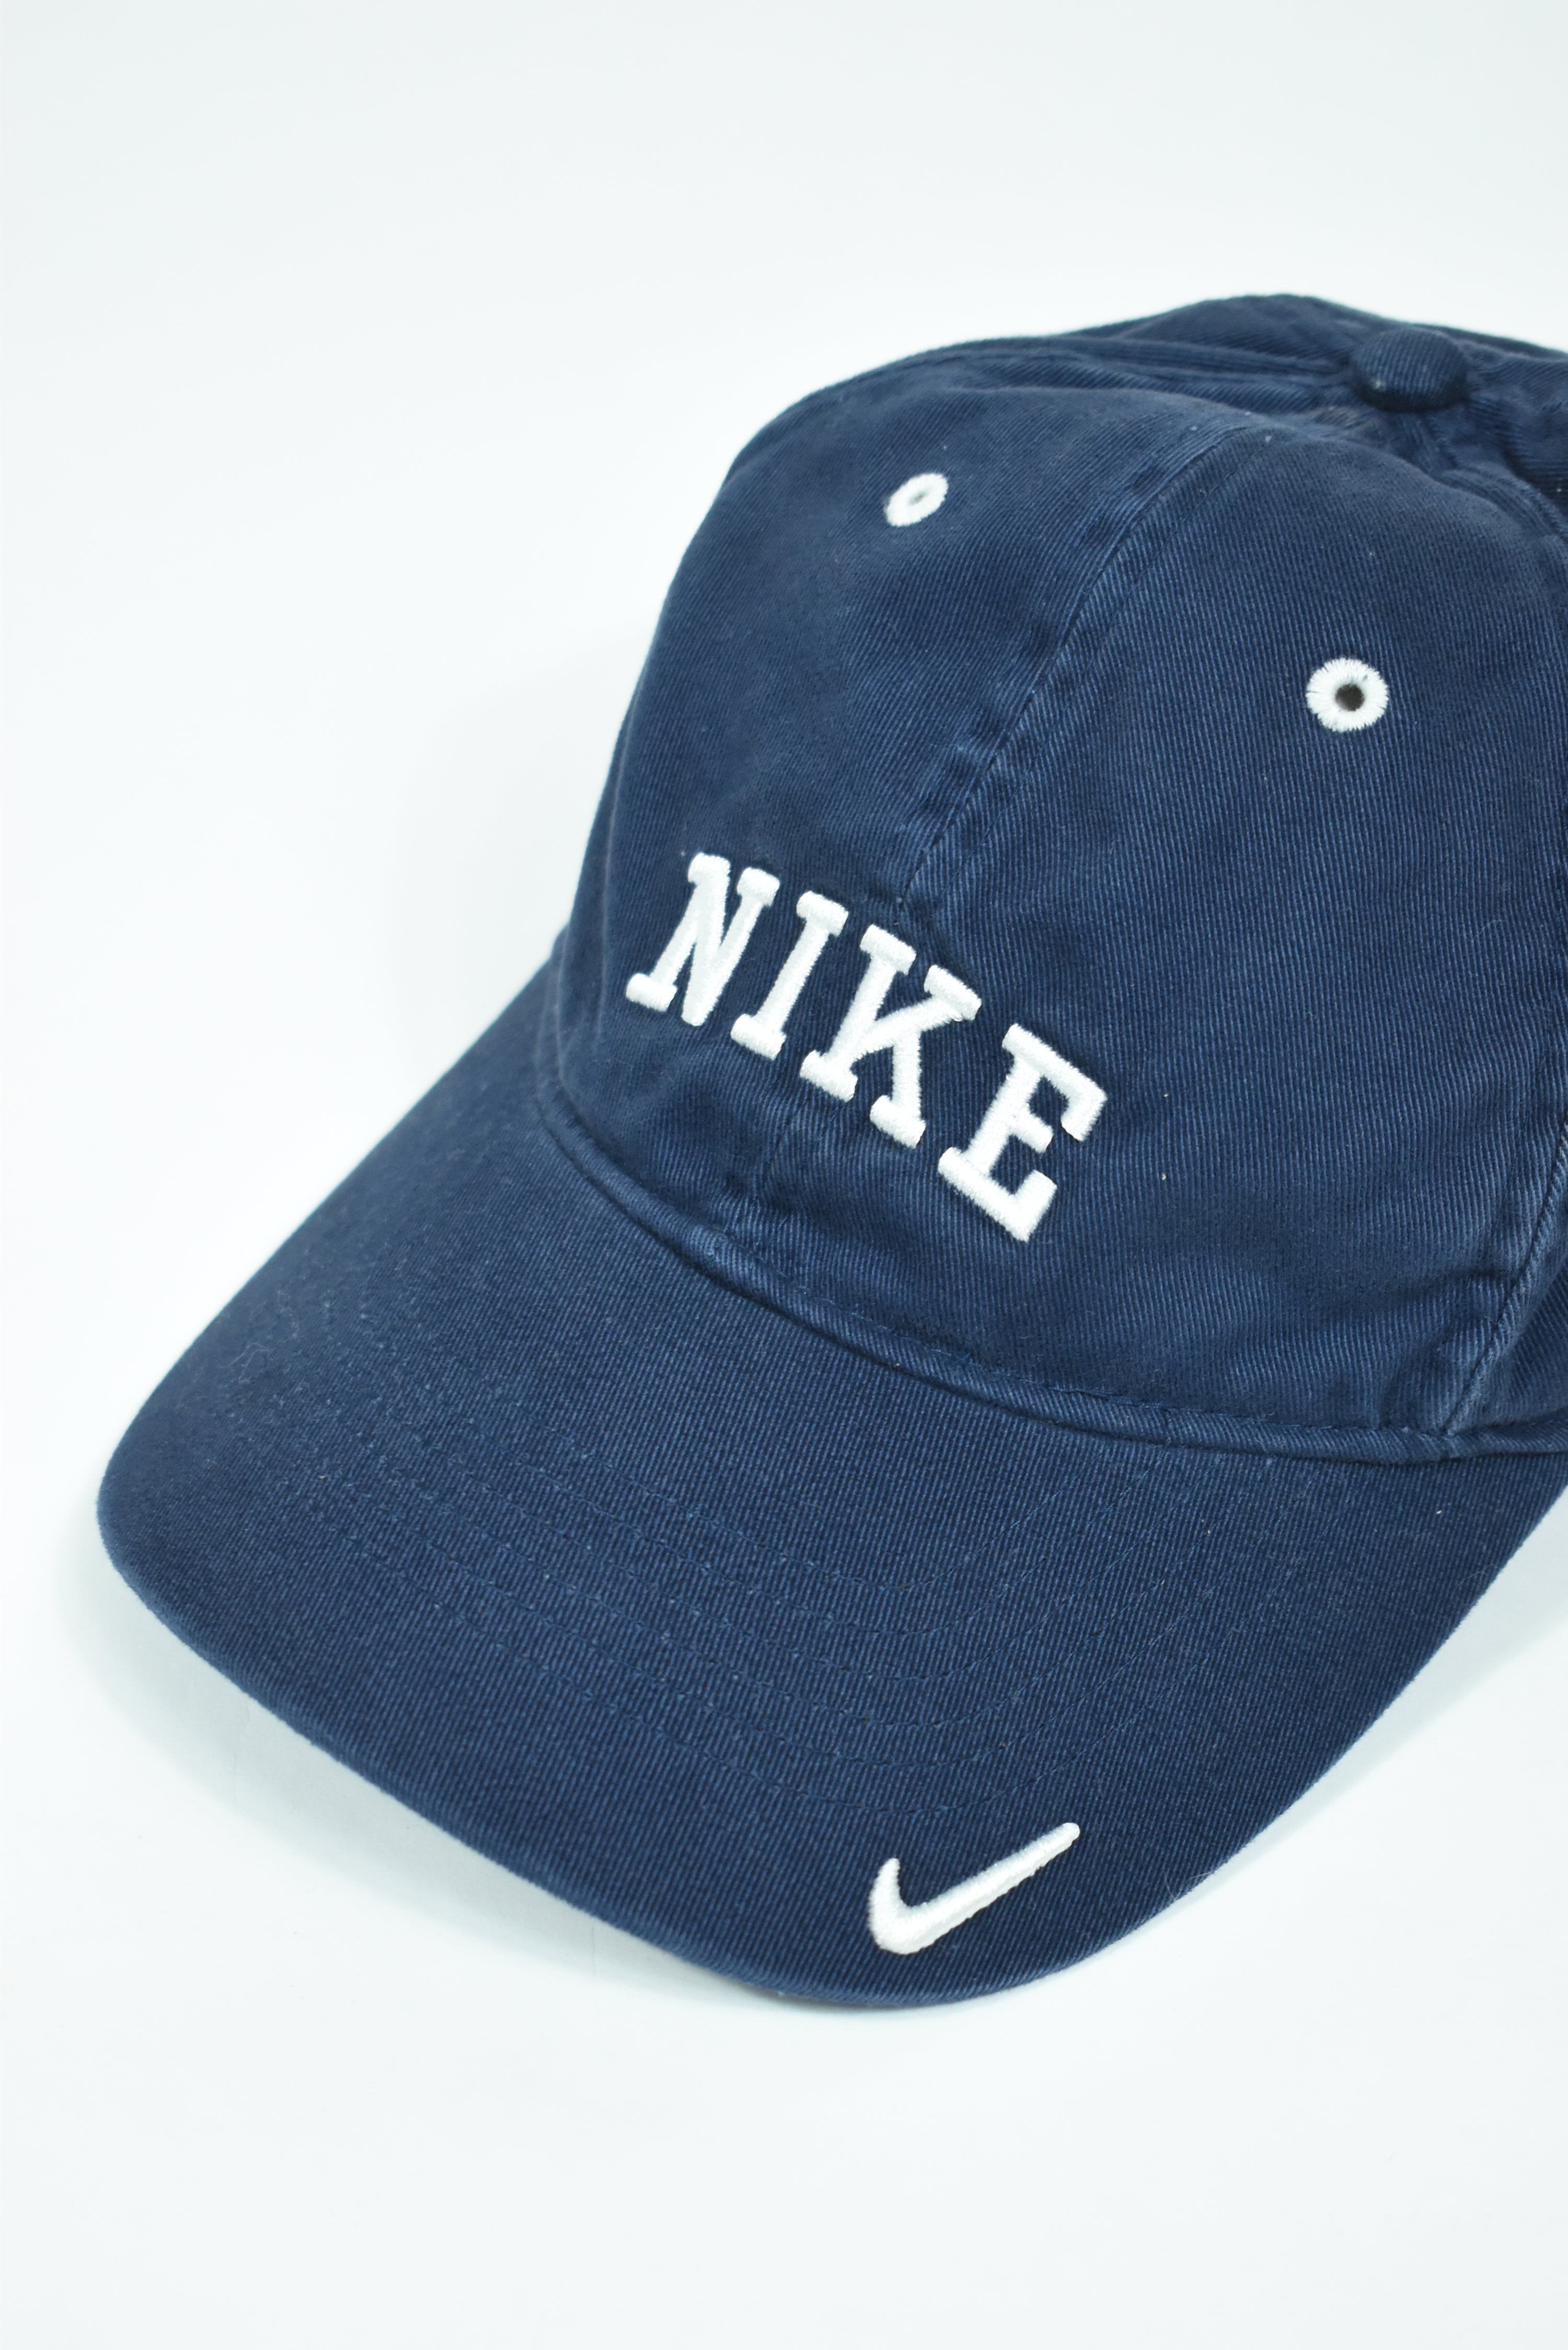 Vintage Nike Navy Embroidery Spellout Cap OS